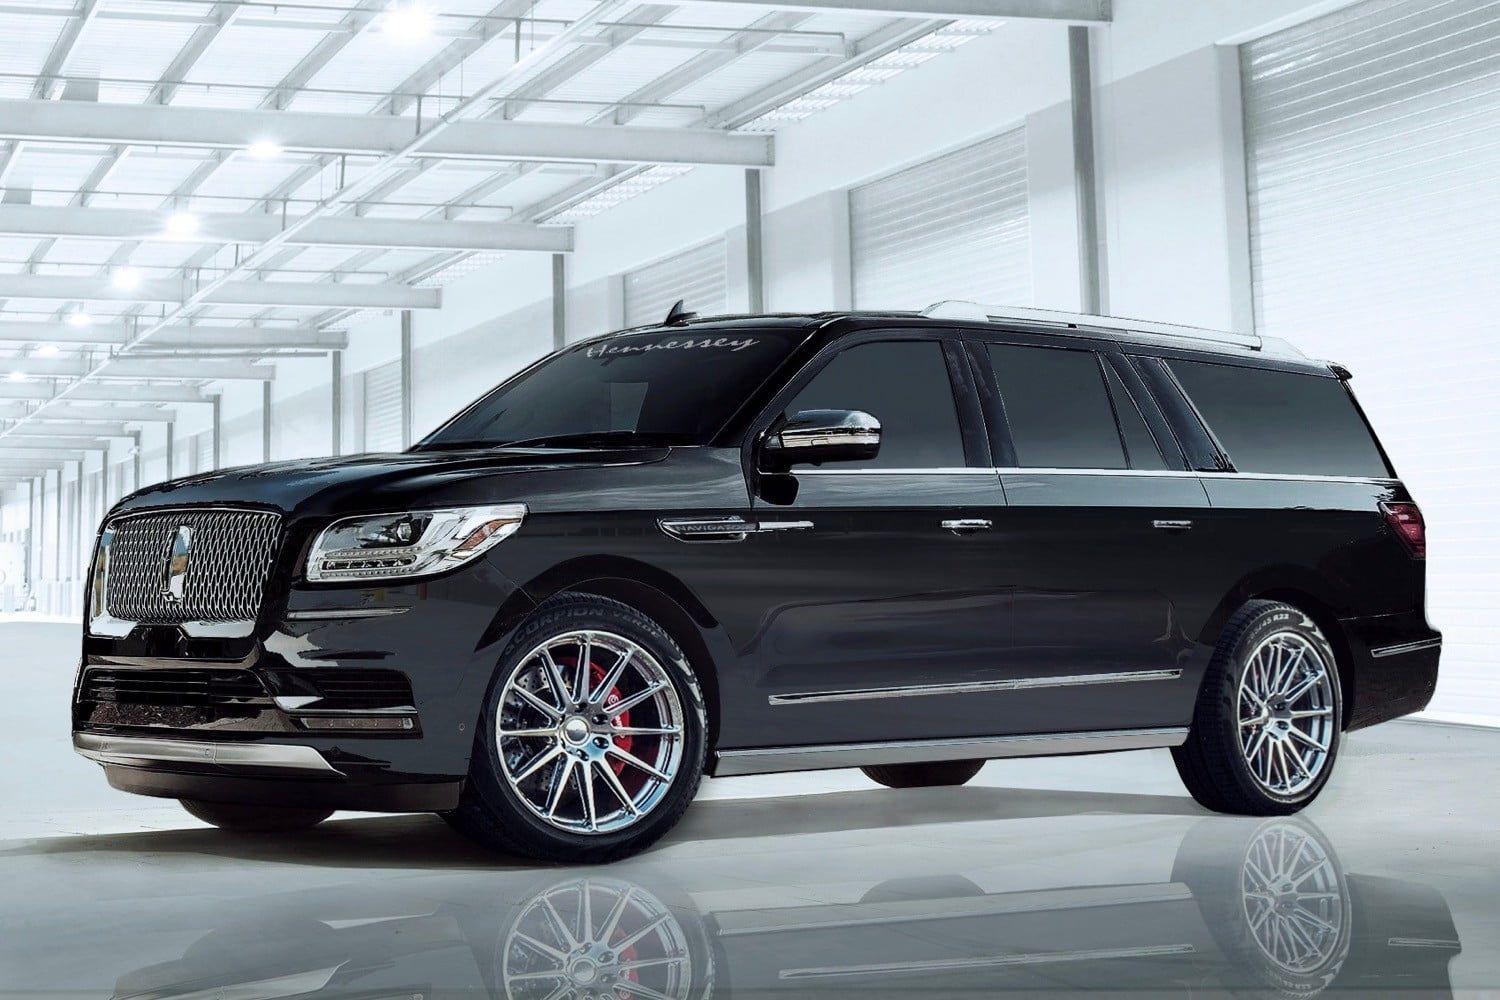 Hennessy Car Company Logo - Hennessey Performance Engineering Builds 600 HP Lincoln Navigator